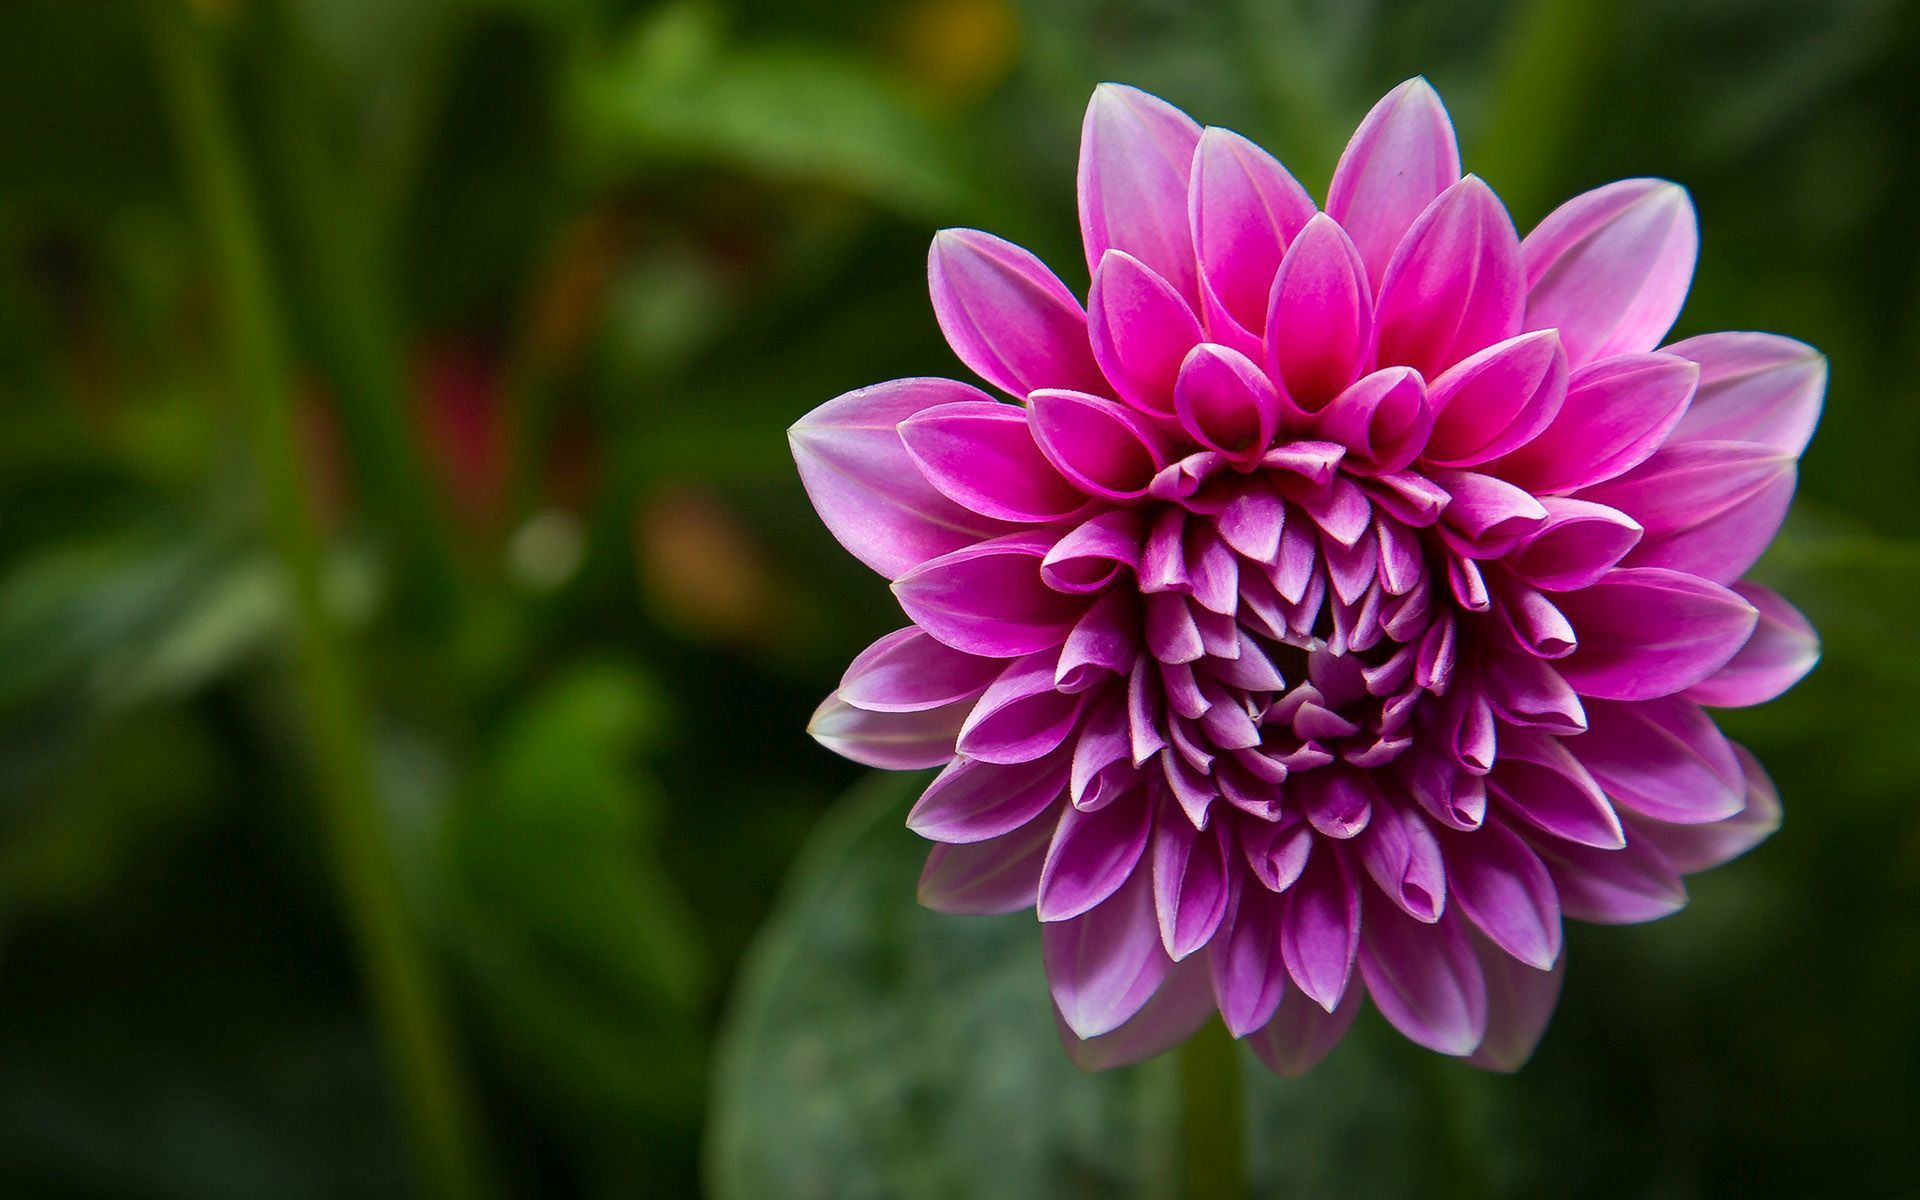 Free Download Cute Dahlia Flower Hd Wallpaper 1667 Wallpaper Themes 19x10 For Your Desktop Mobile Tablet Explore 67 Dahlia Wallpaper Dahlia Flower Wallpaper Serena And Lily Dahlia Wallpaper